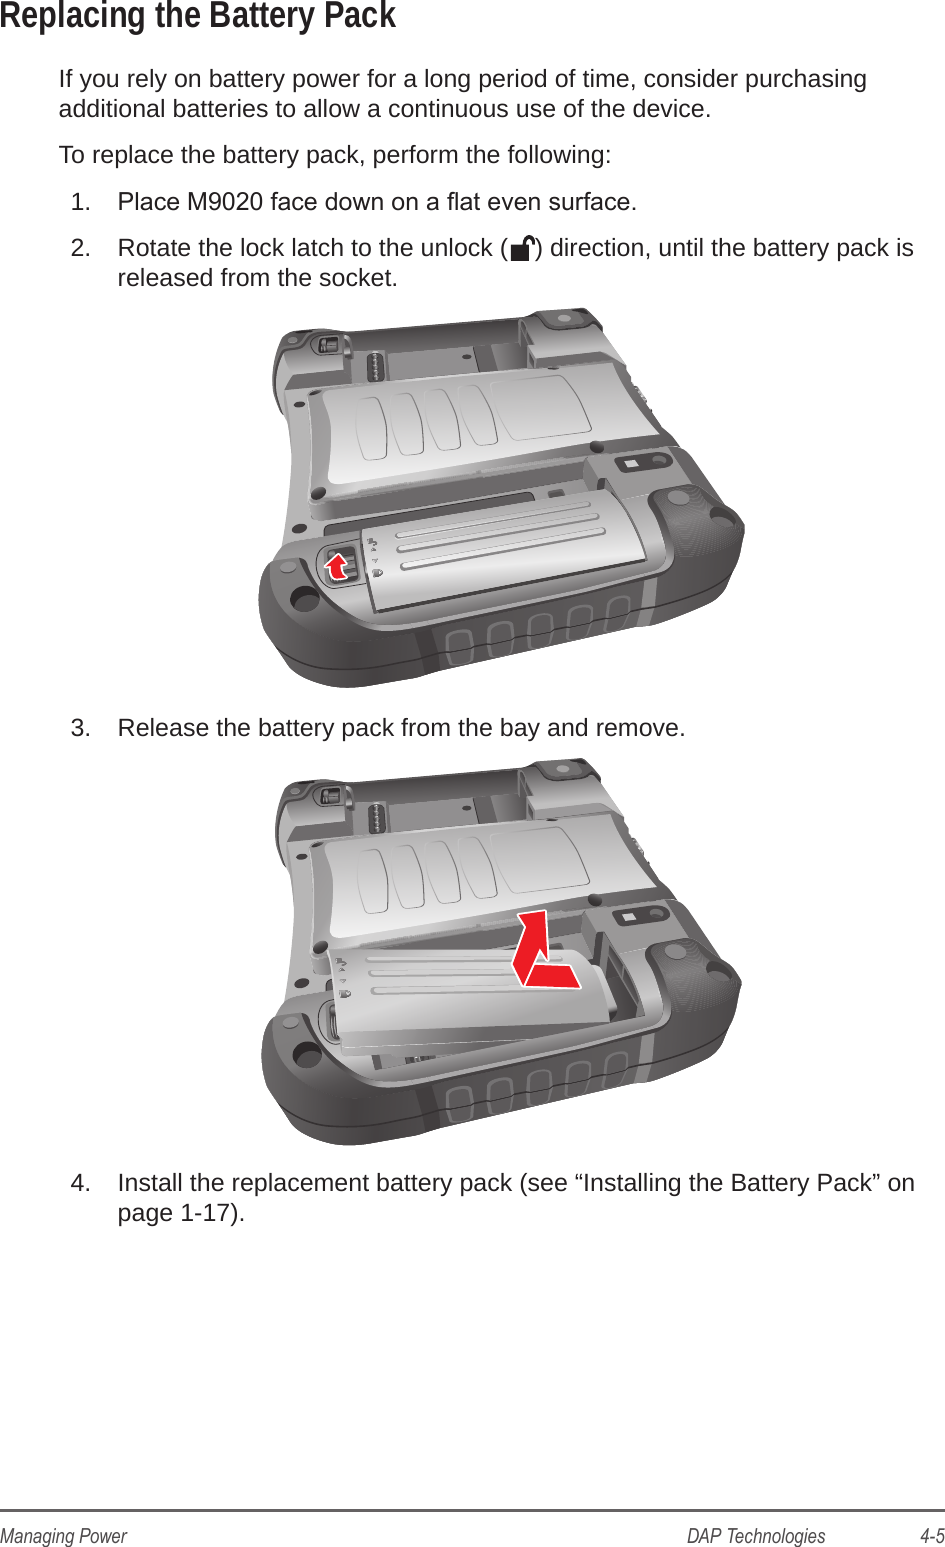 DAP Technologies                    4-5Managing PowerReplacing the Battery PackIf you rely on battery power for a long period of time, consider purchasing additional batteries to allow a continuous use of the device.To replace the battery pack, perform the following:1.  Place M9020 face down on a at even surface.2.  Rotate the lock latch to the unlock ( ) direction, until the battery pack is released from the socket.3.  Release the battery pack from the bay and remove.4.  Install the replacement battery pack (see “Installing the Battery Pack” on page 1-17).